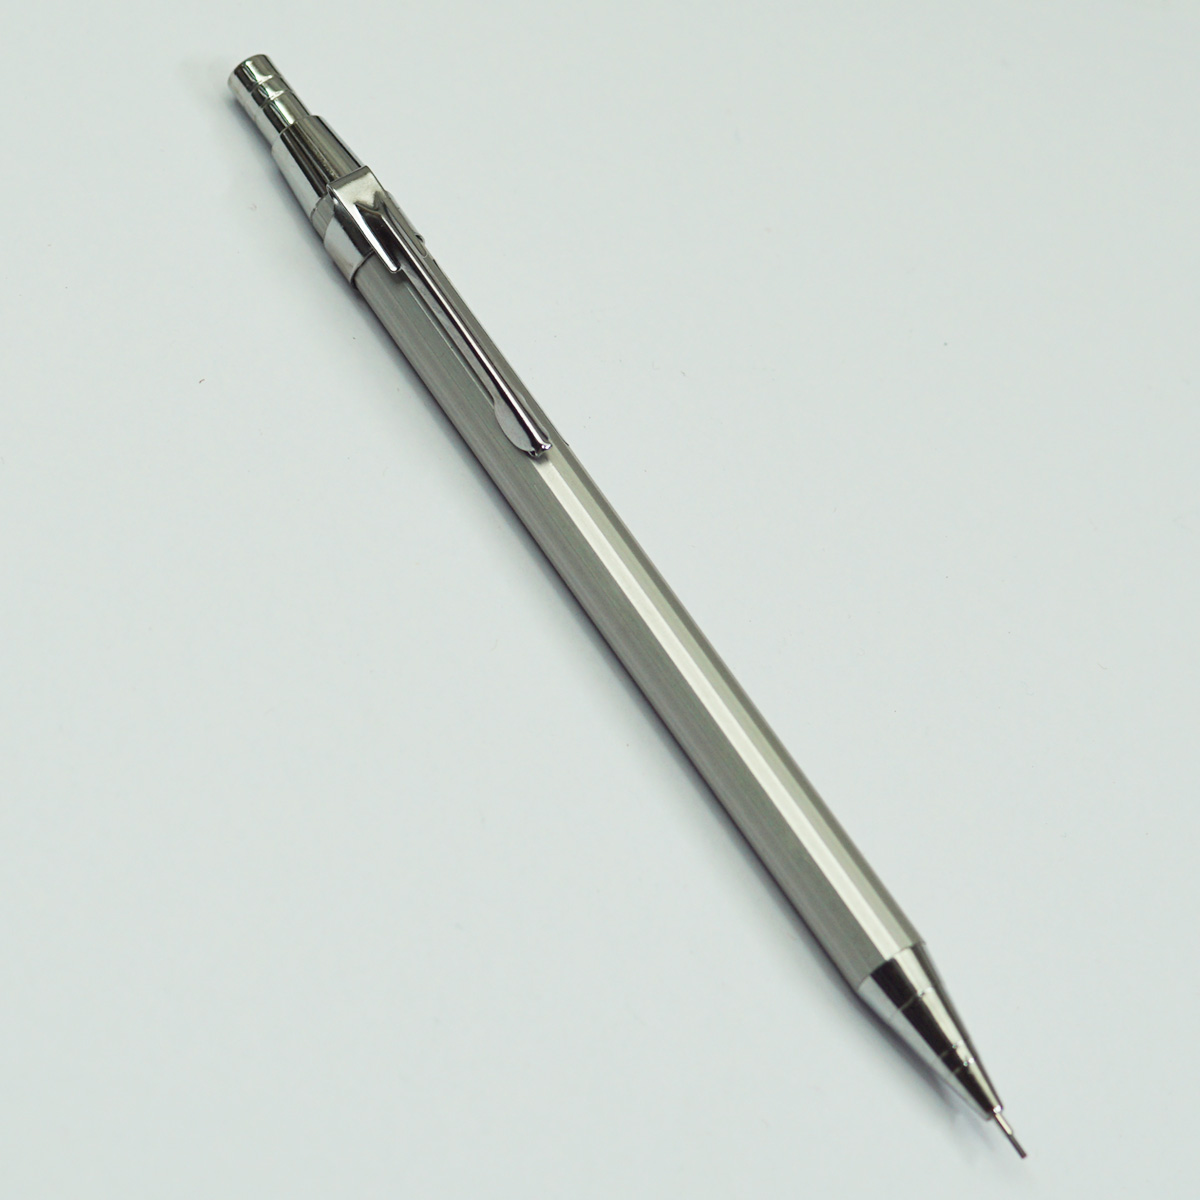 Jian Hao Silver Color Body With Silver Clip 0.7mm Led Pencil SKU 50052